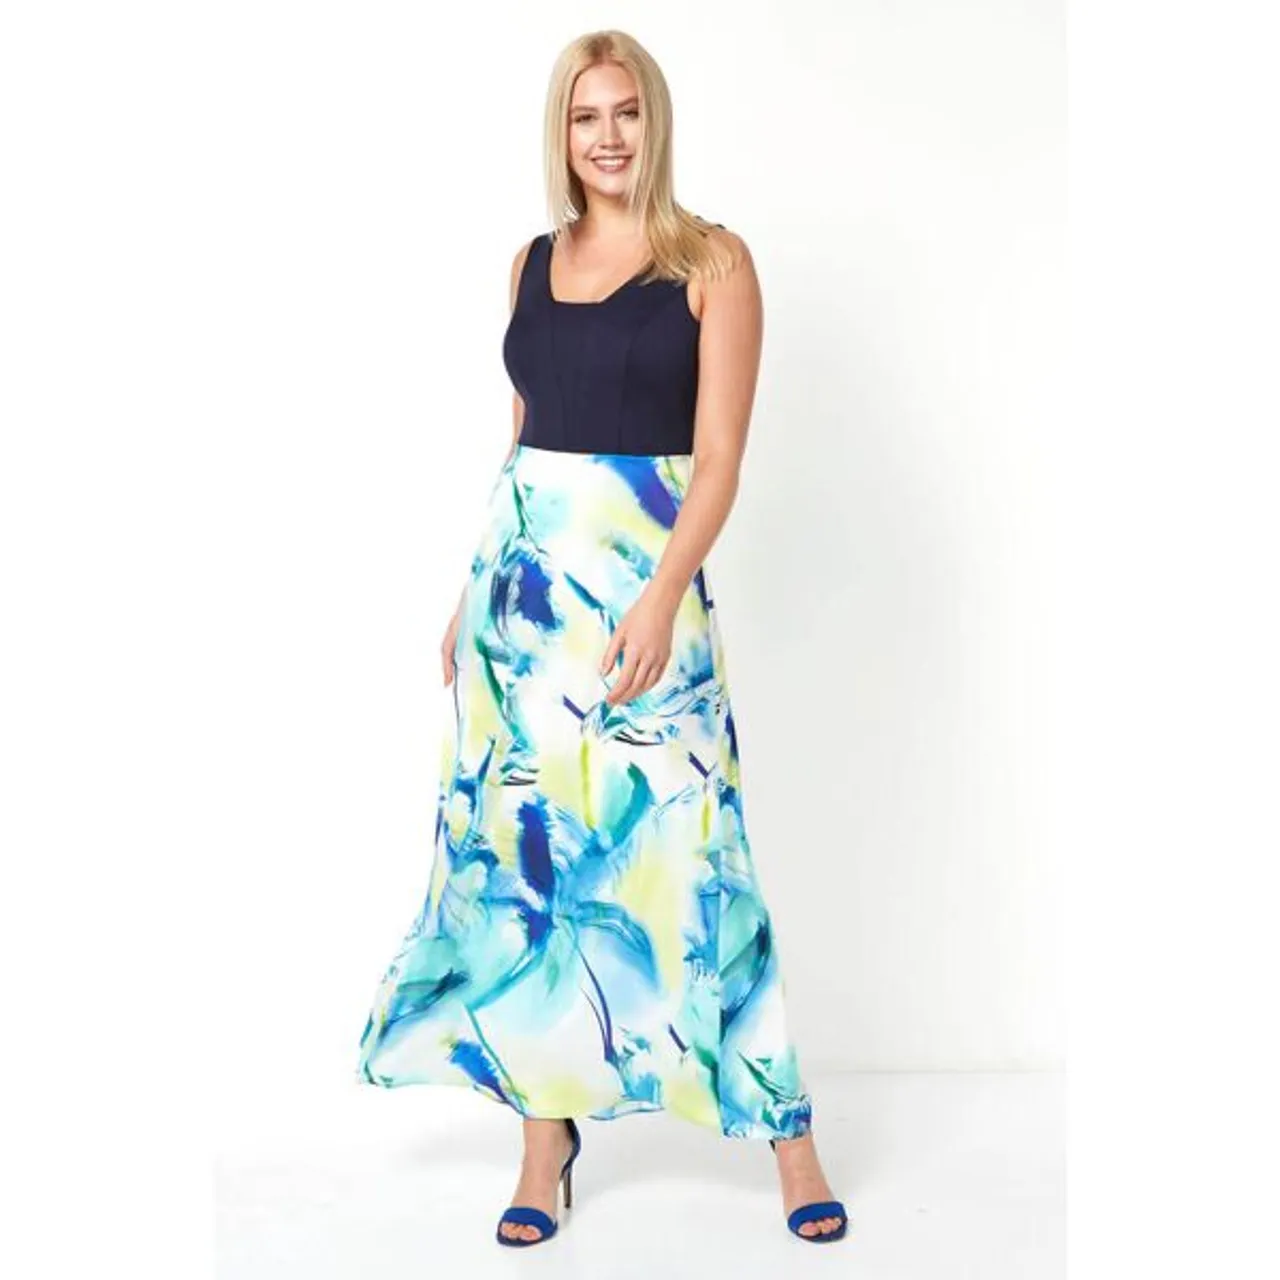 Roman Abstract Print Maxi Dress in Navy - Size 10 10 female